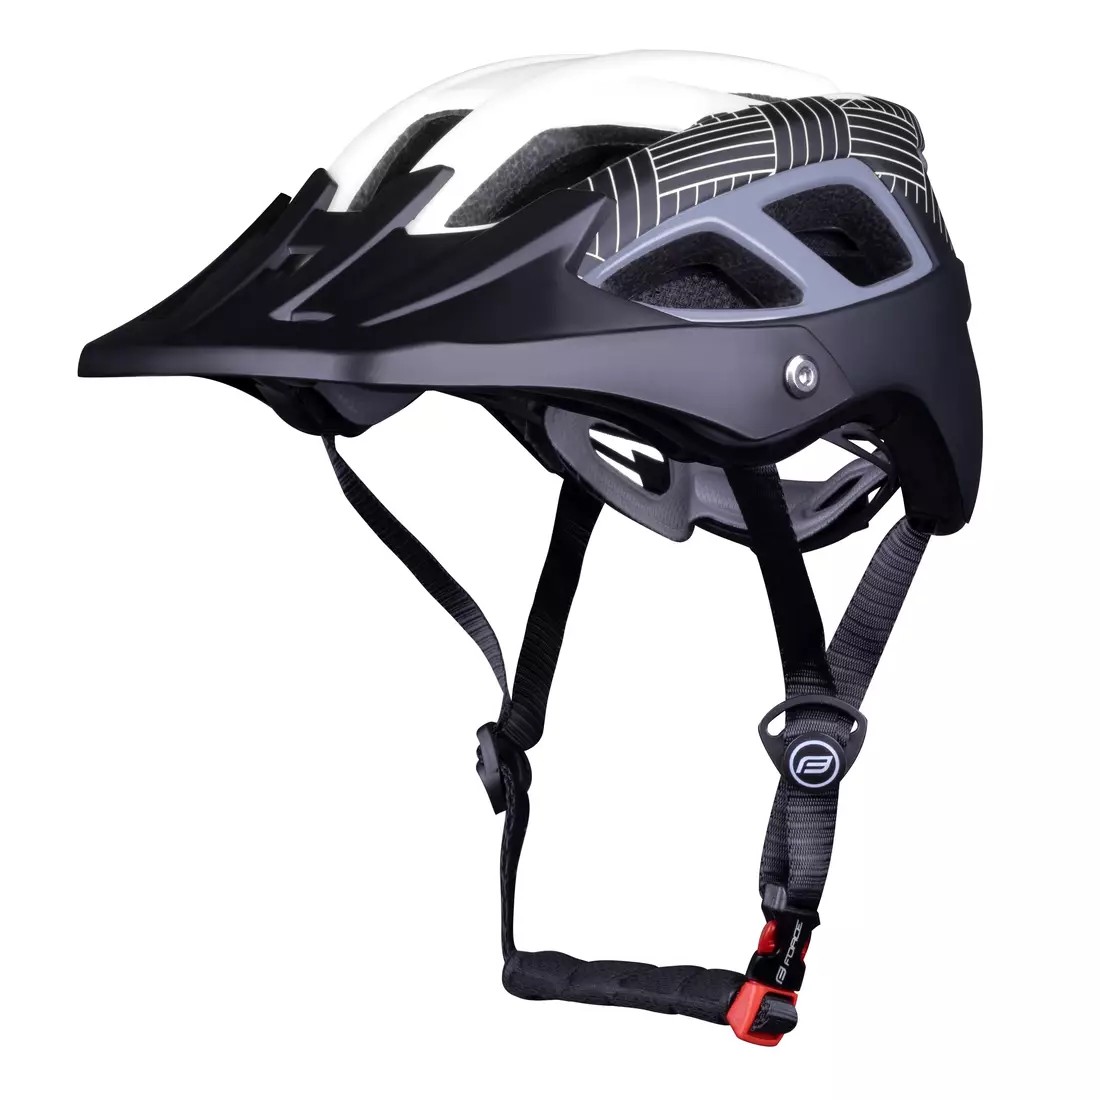 FORCE Bicycle helmet AVES MTB, black and white mat 90299904